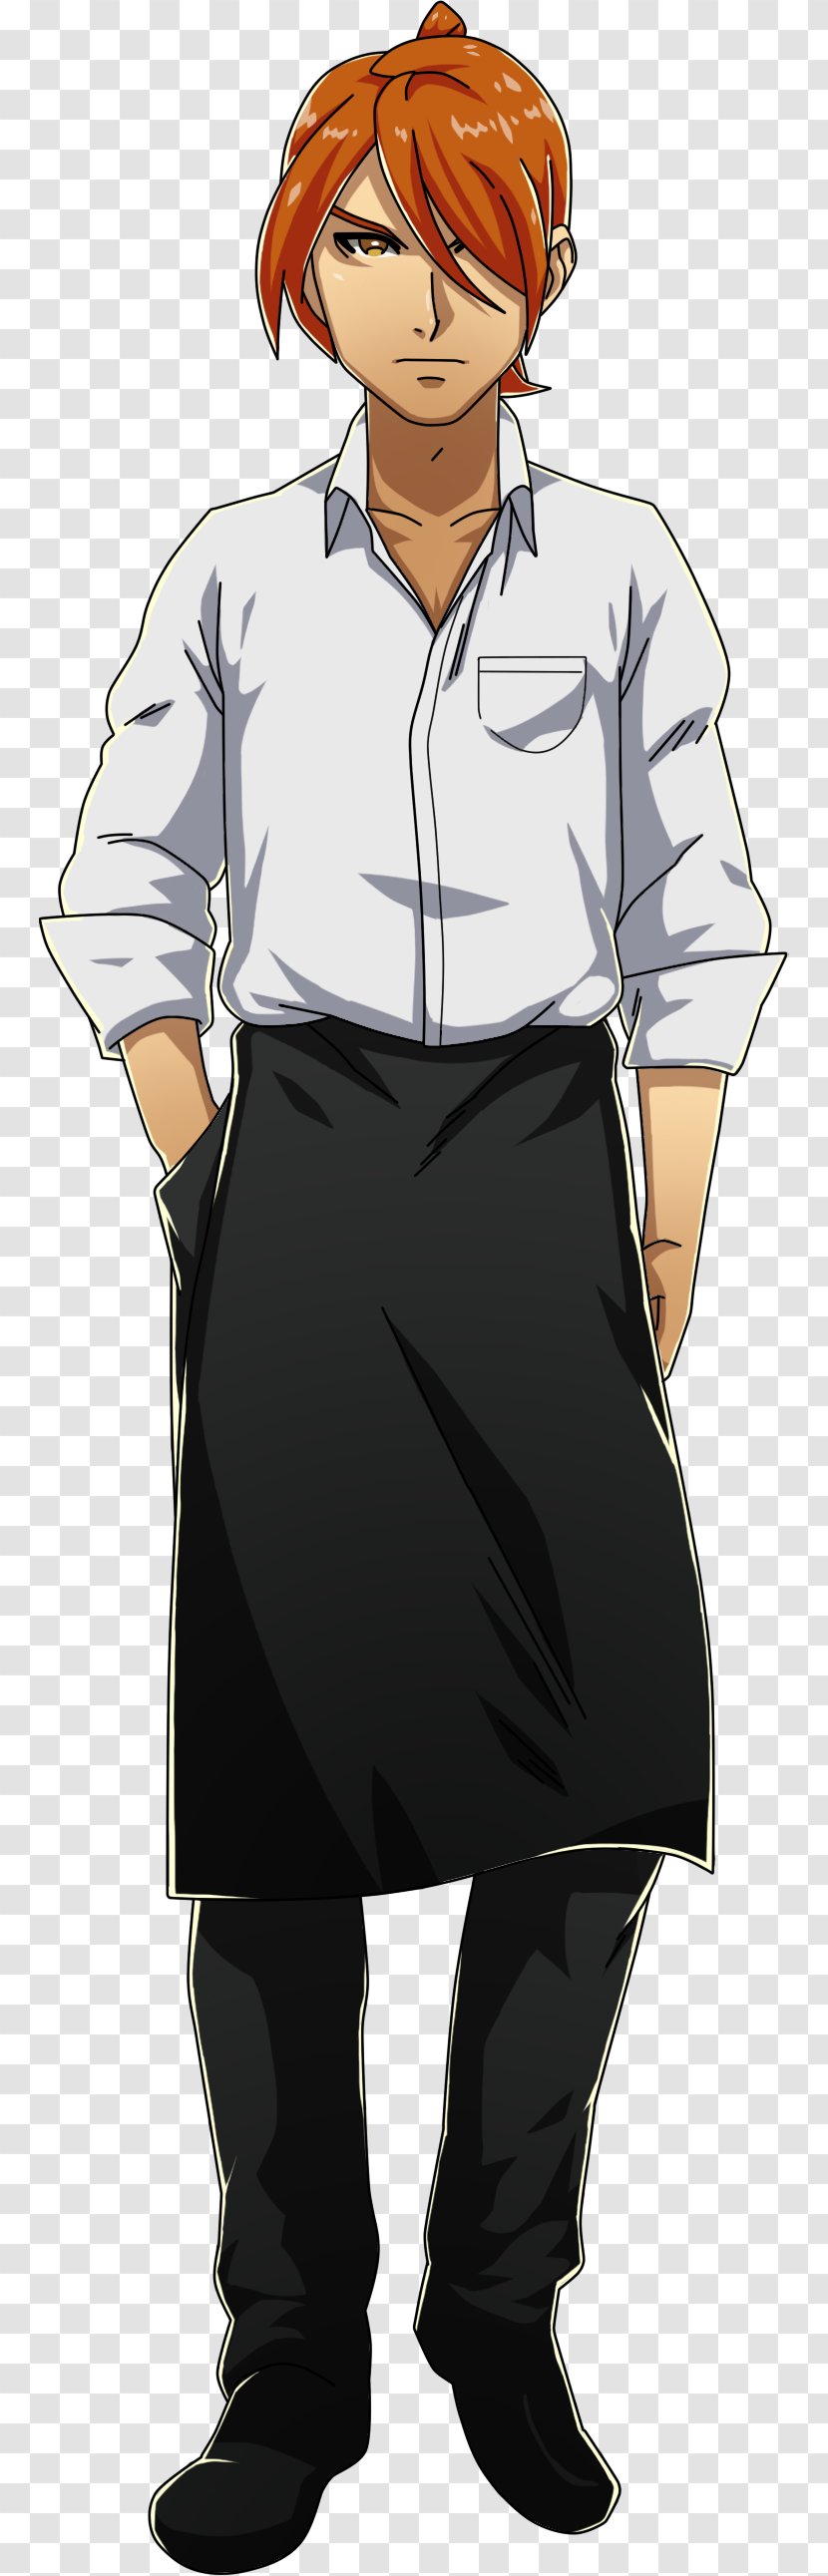 The Bachelor Character Bachelor's Degree Boy - Tree - Worked As A Waiter Transparent PNG